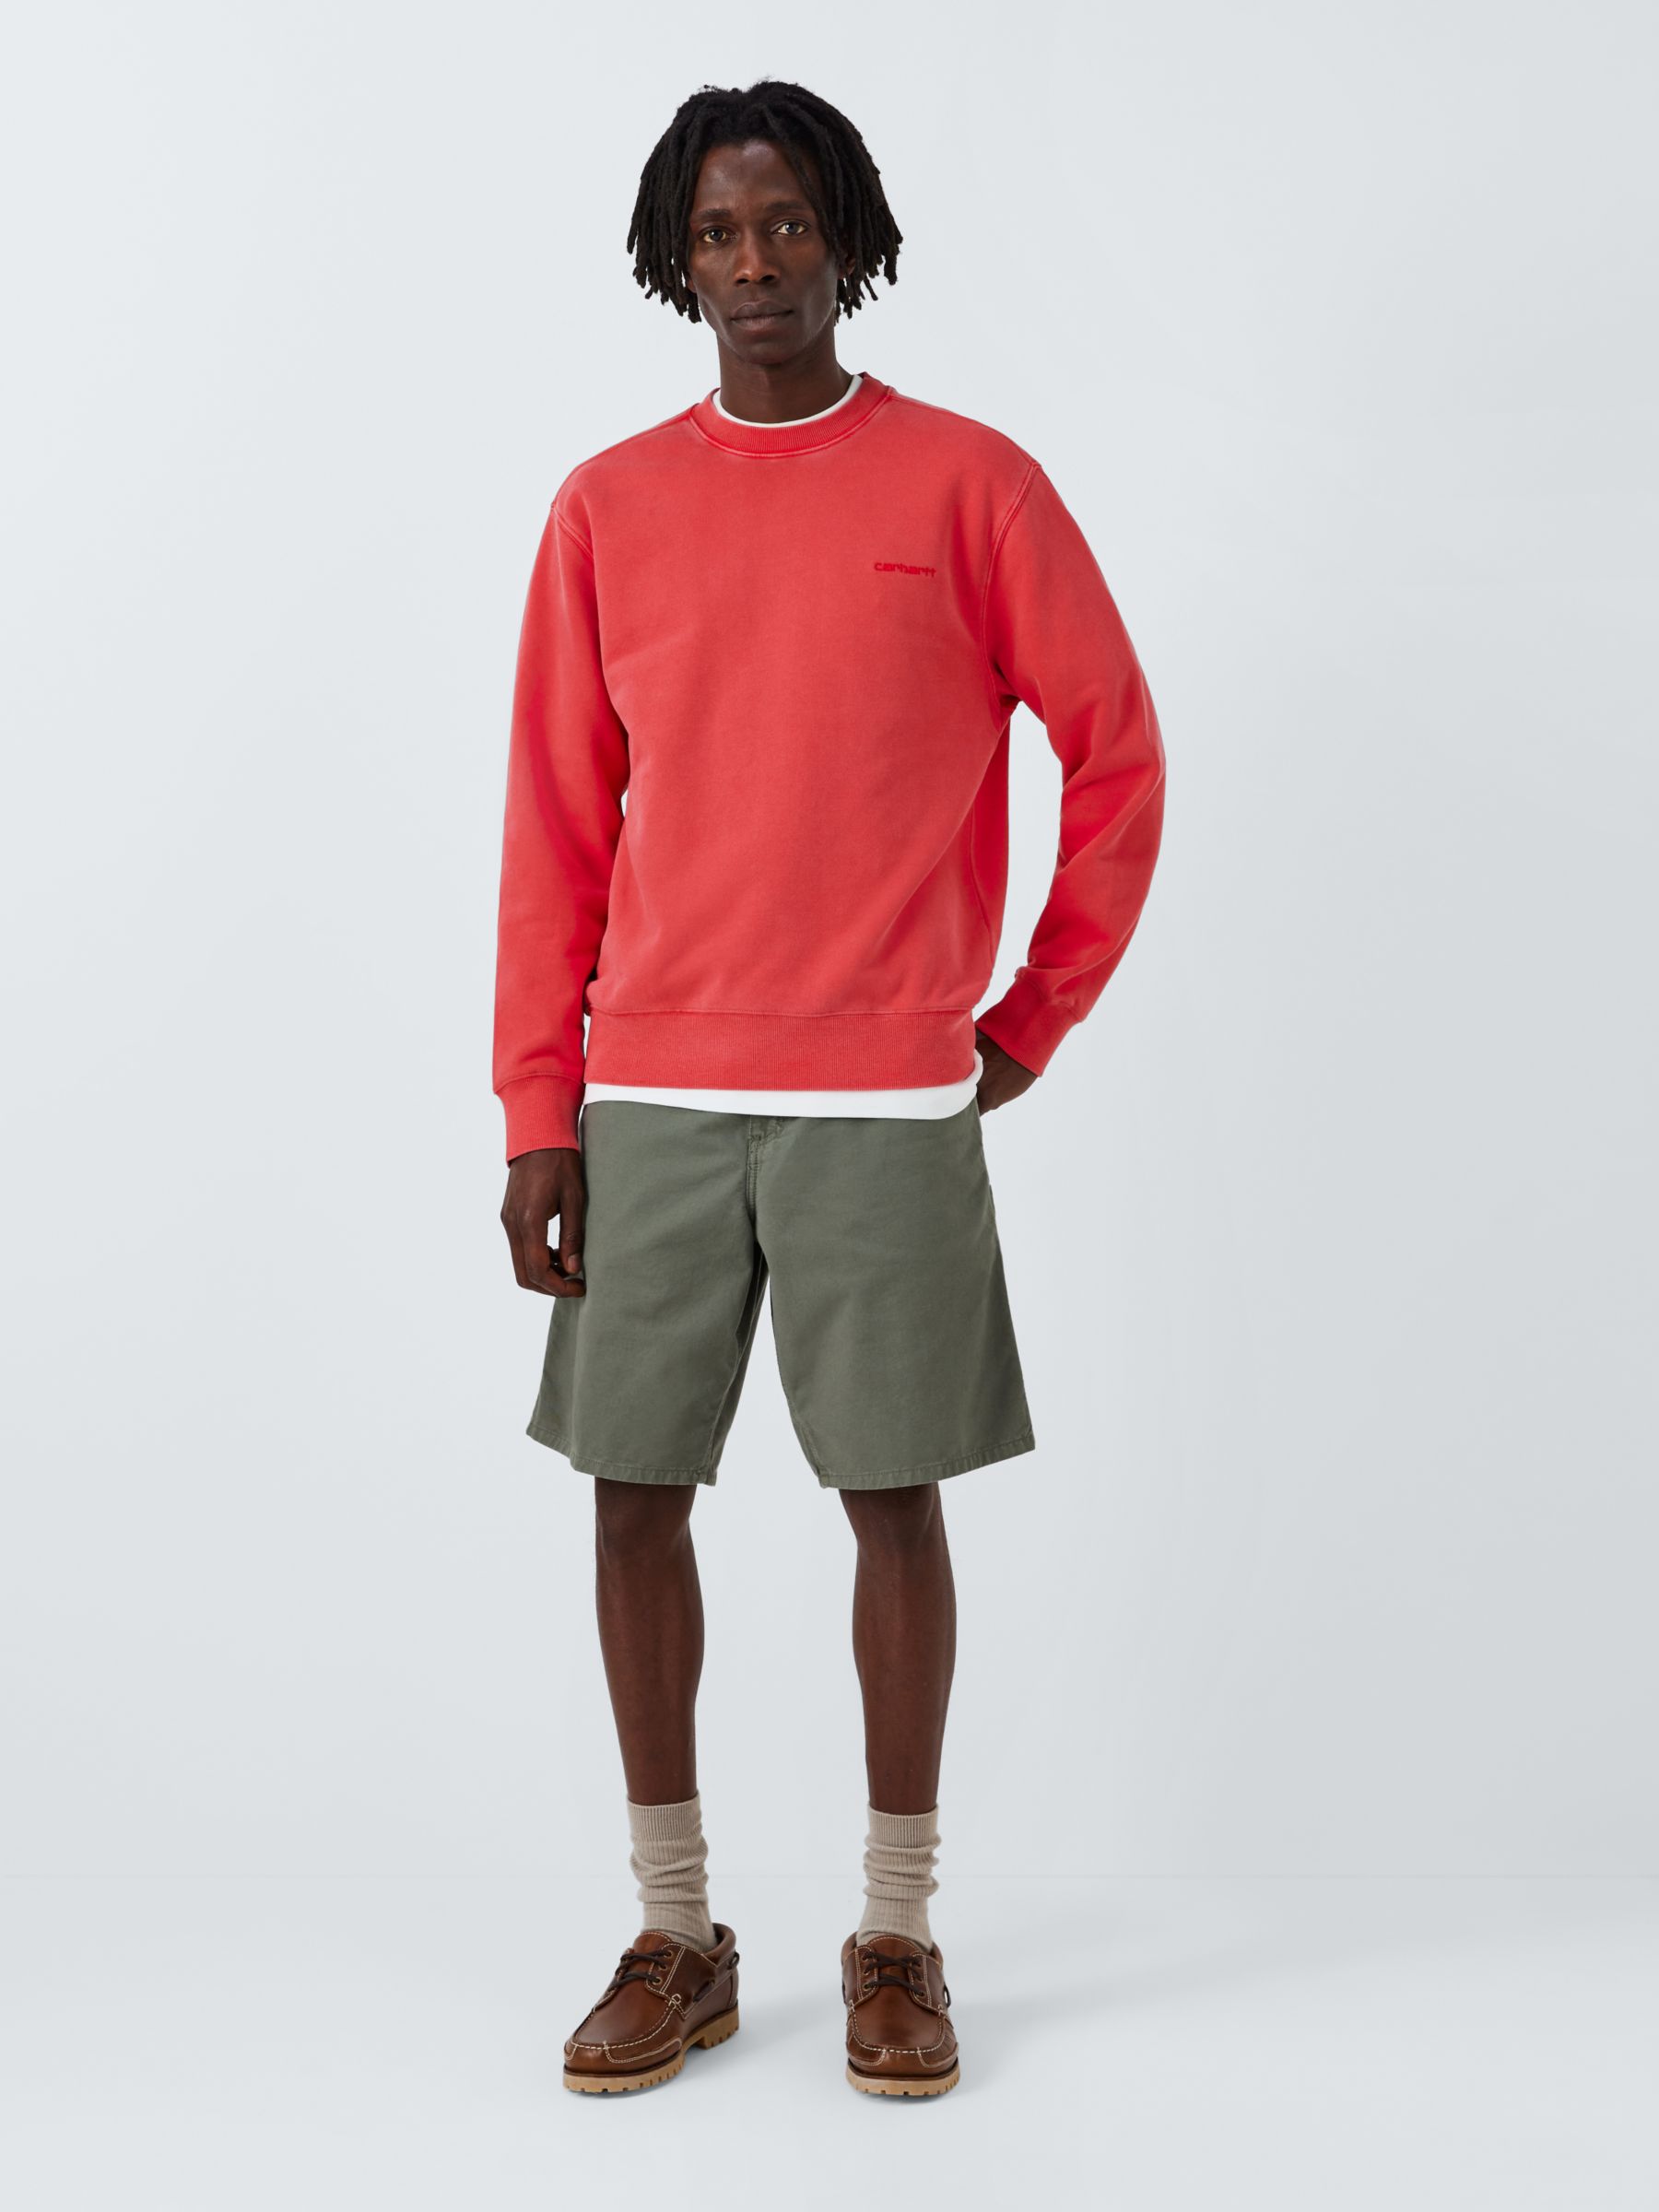 Buy Carhartt WIP Single Knee Relaxed Fit Shorts, Park Online at johnlewis.com